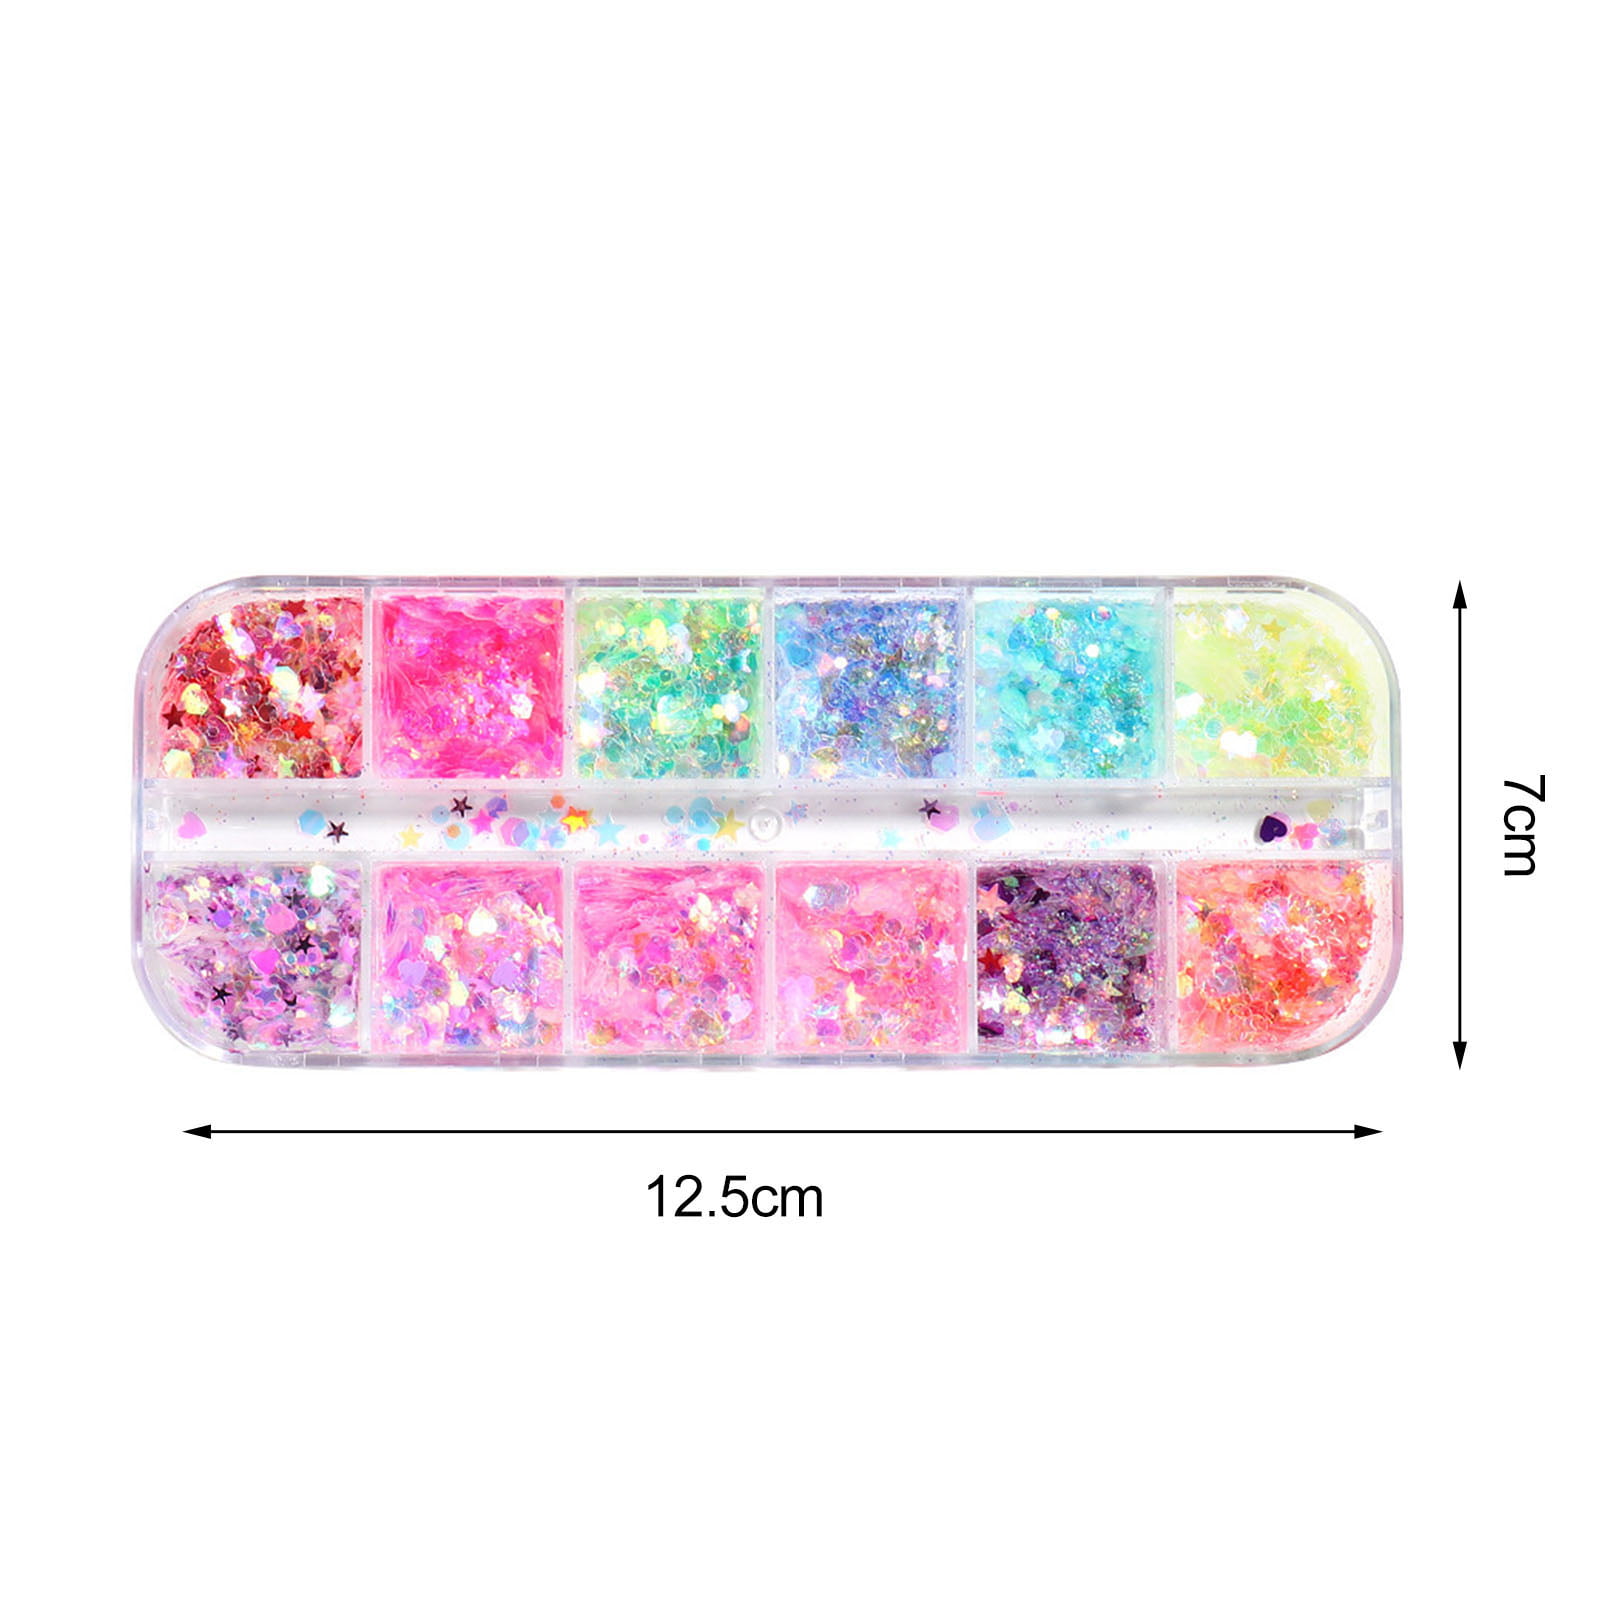 Holographic Chunky Glitter 12-Pot for Nail Art and Costmetic - China Chunky  Glitter and Holographic Glitter price